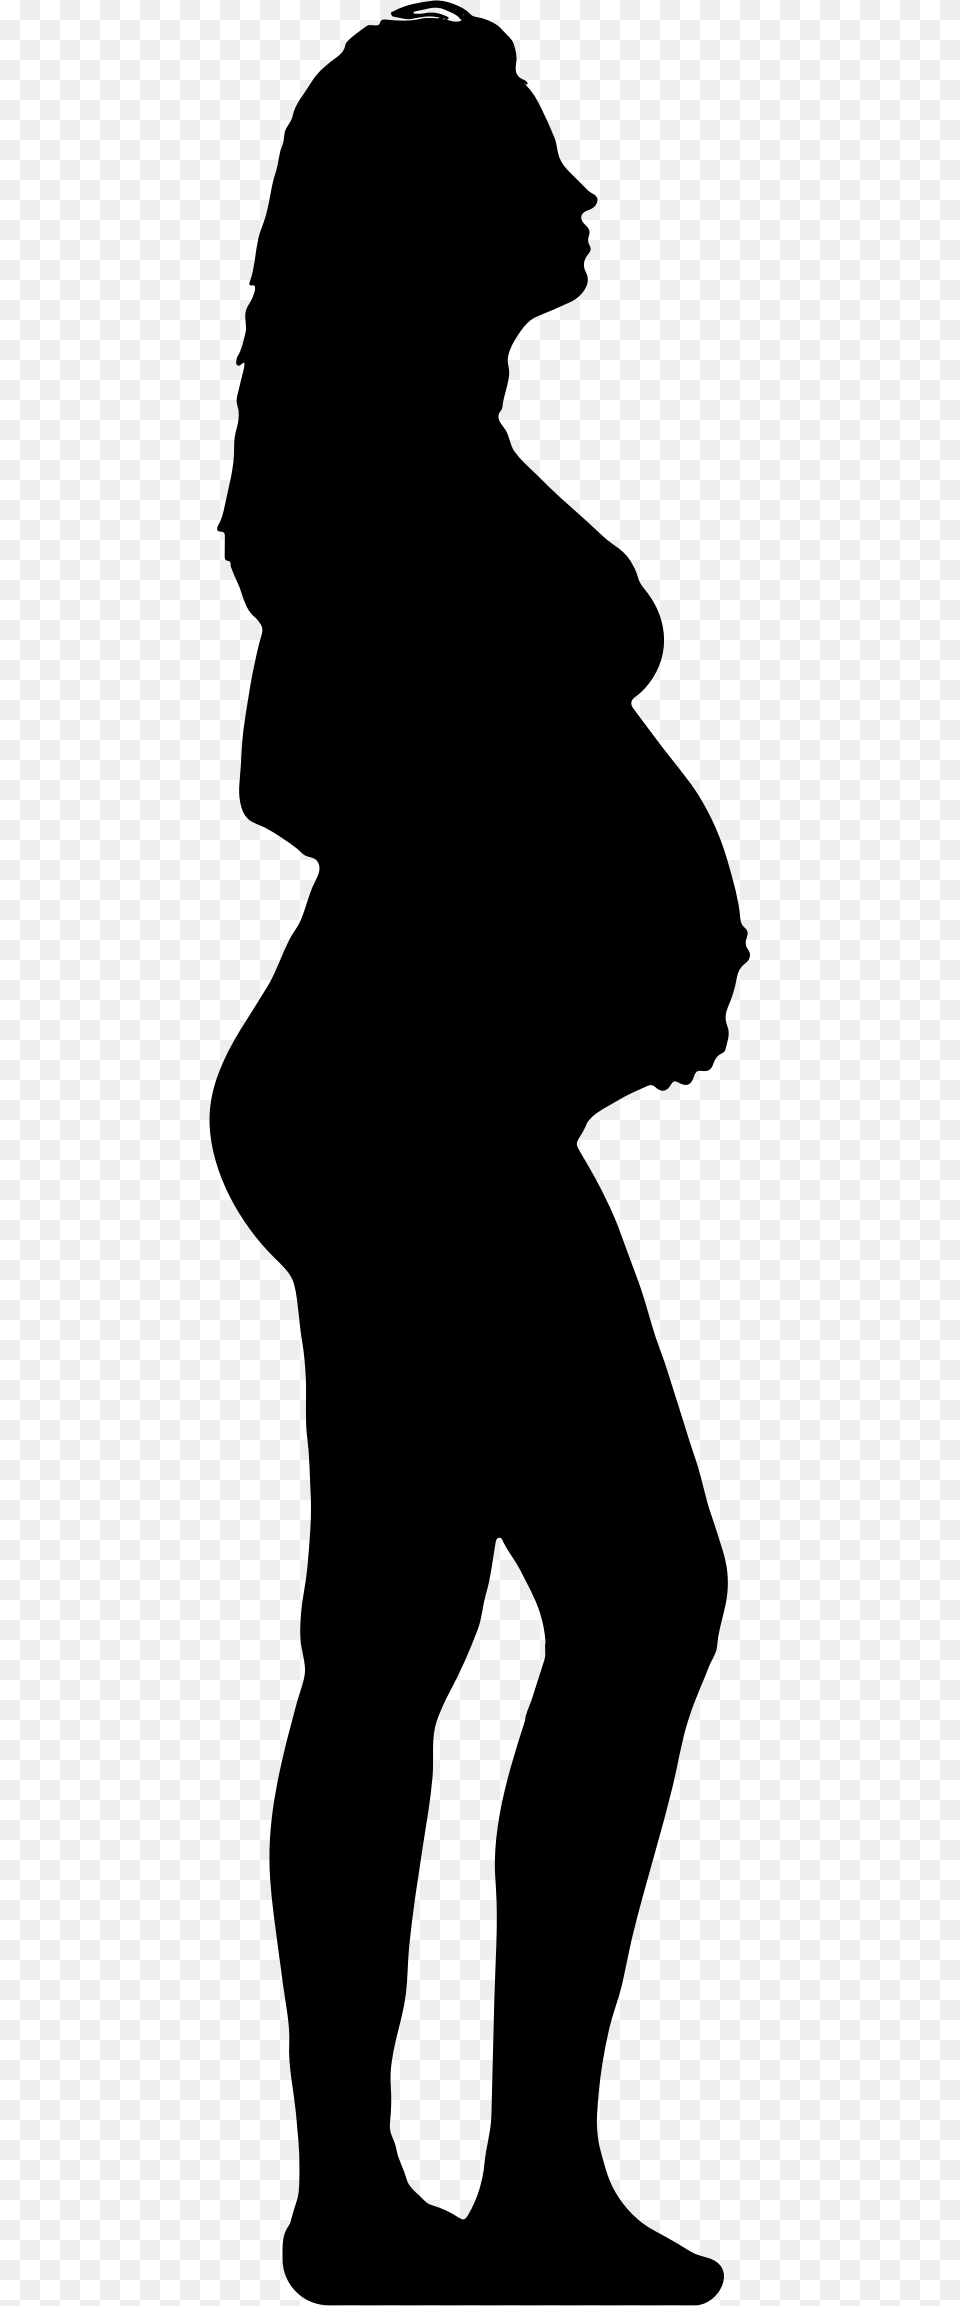 Pregnant Woman Clutching Abdomen Silhouette Icons, Gray Png Image